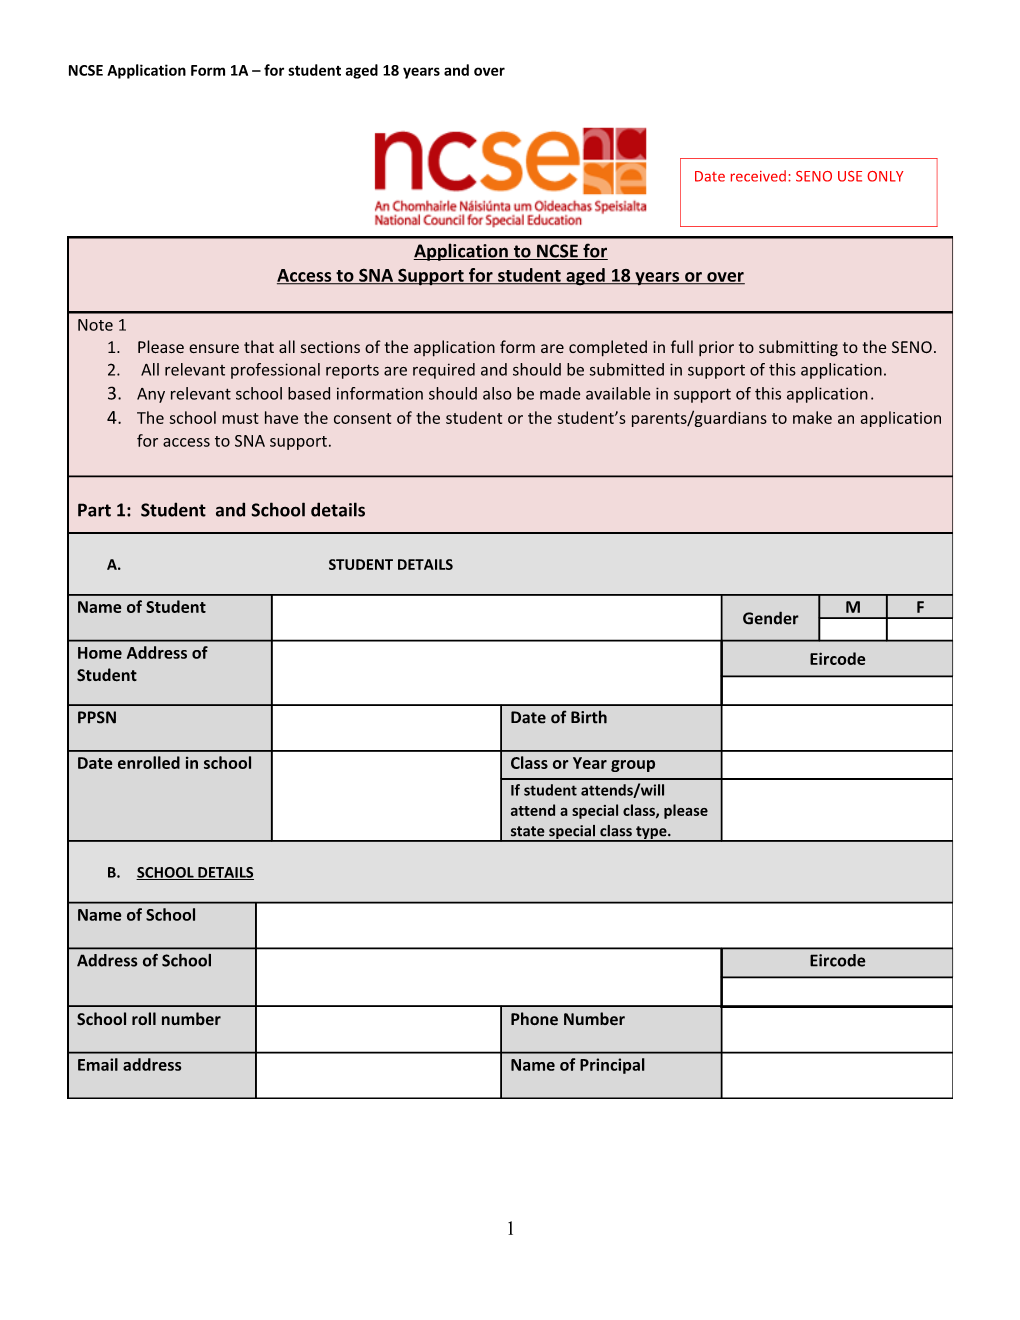 NCSE Application Form 1A for Student Aged 18 Years and Over